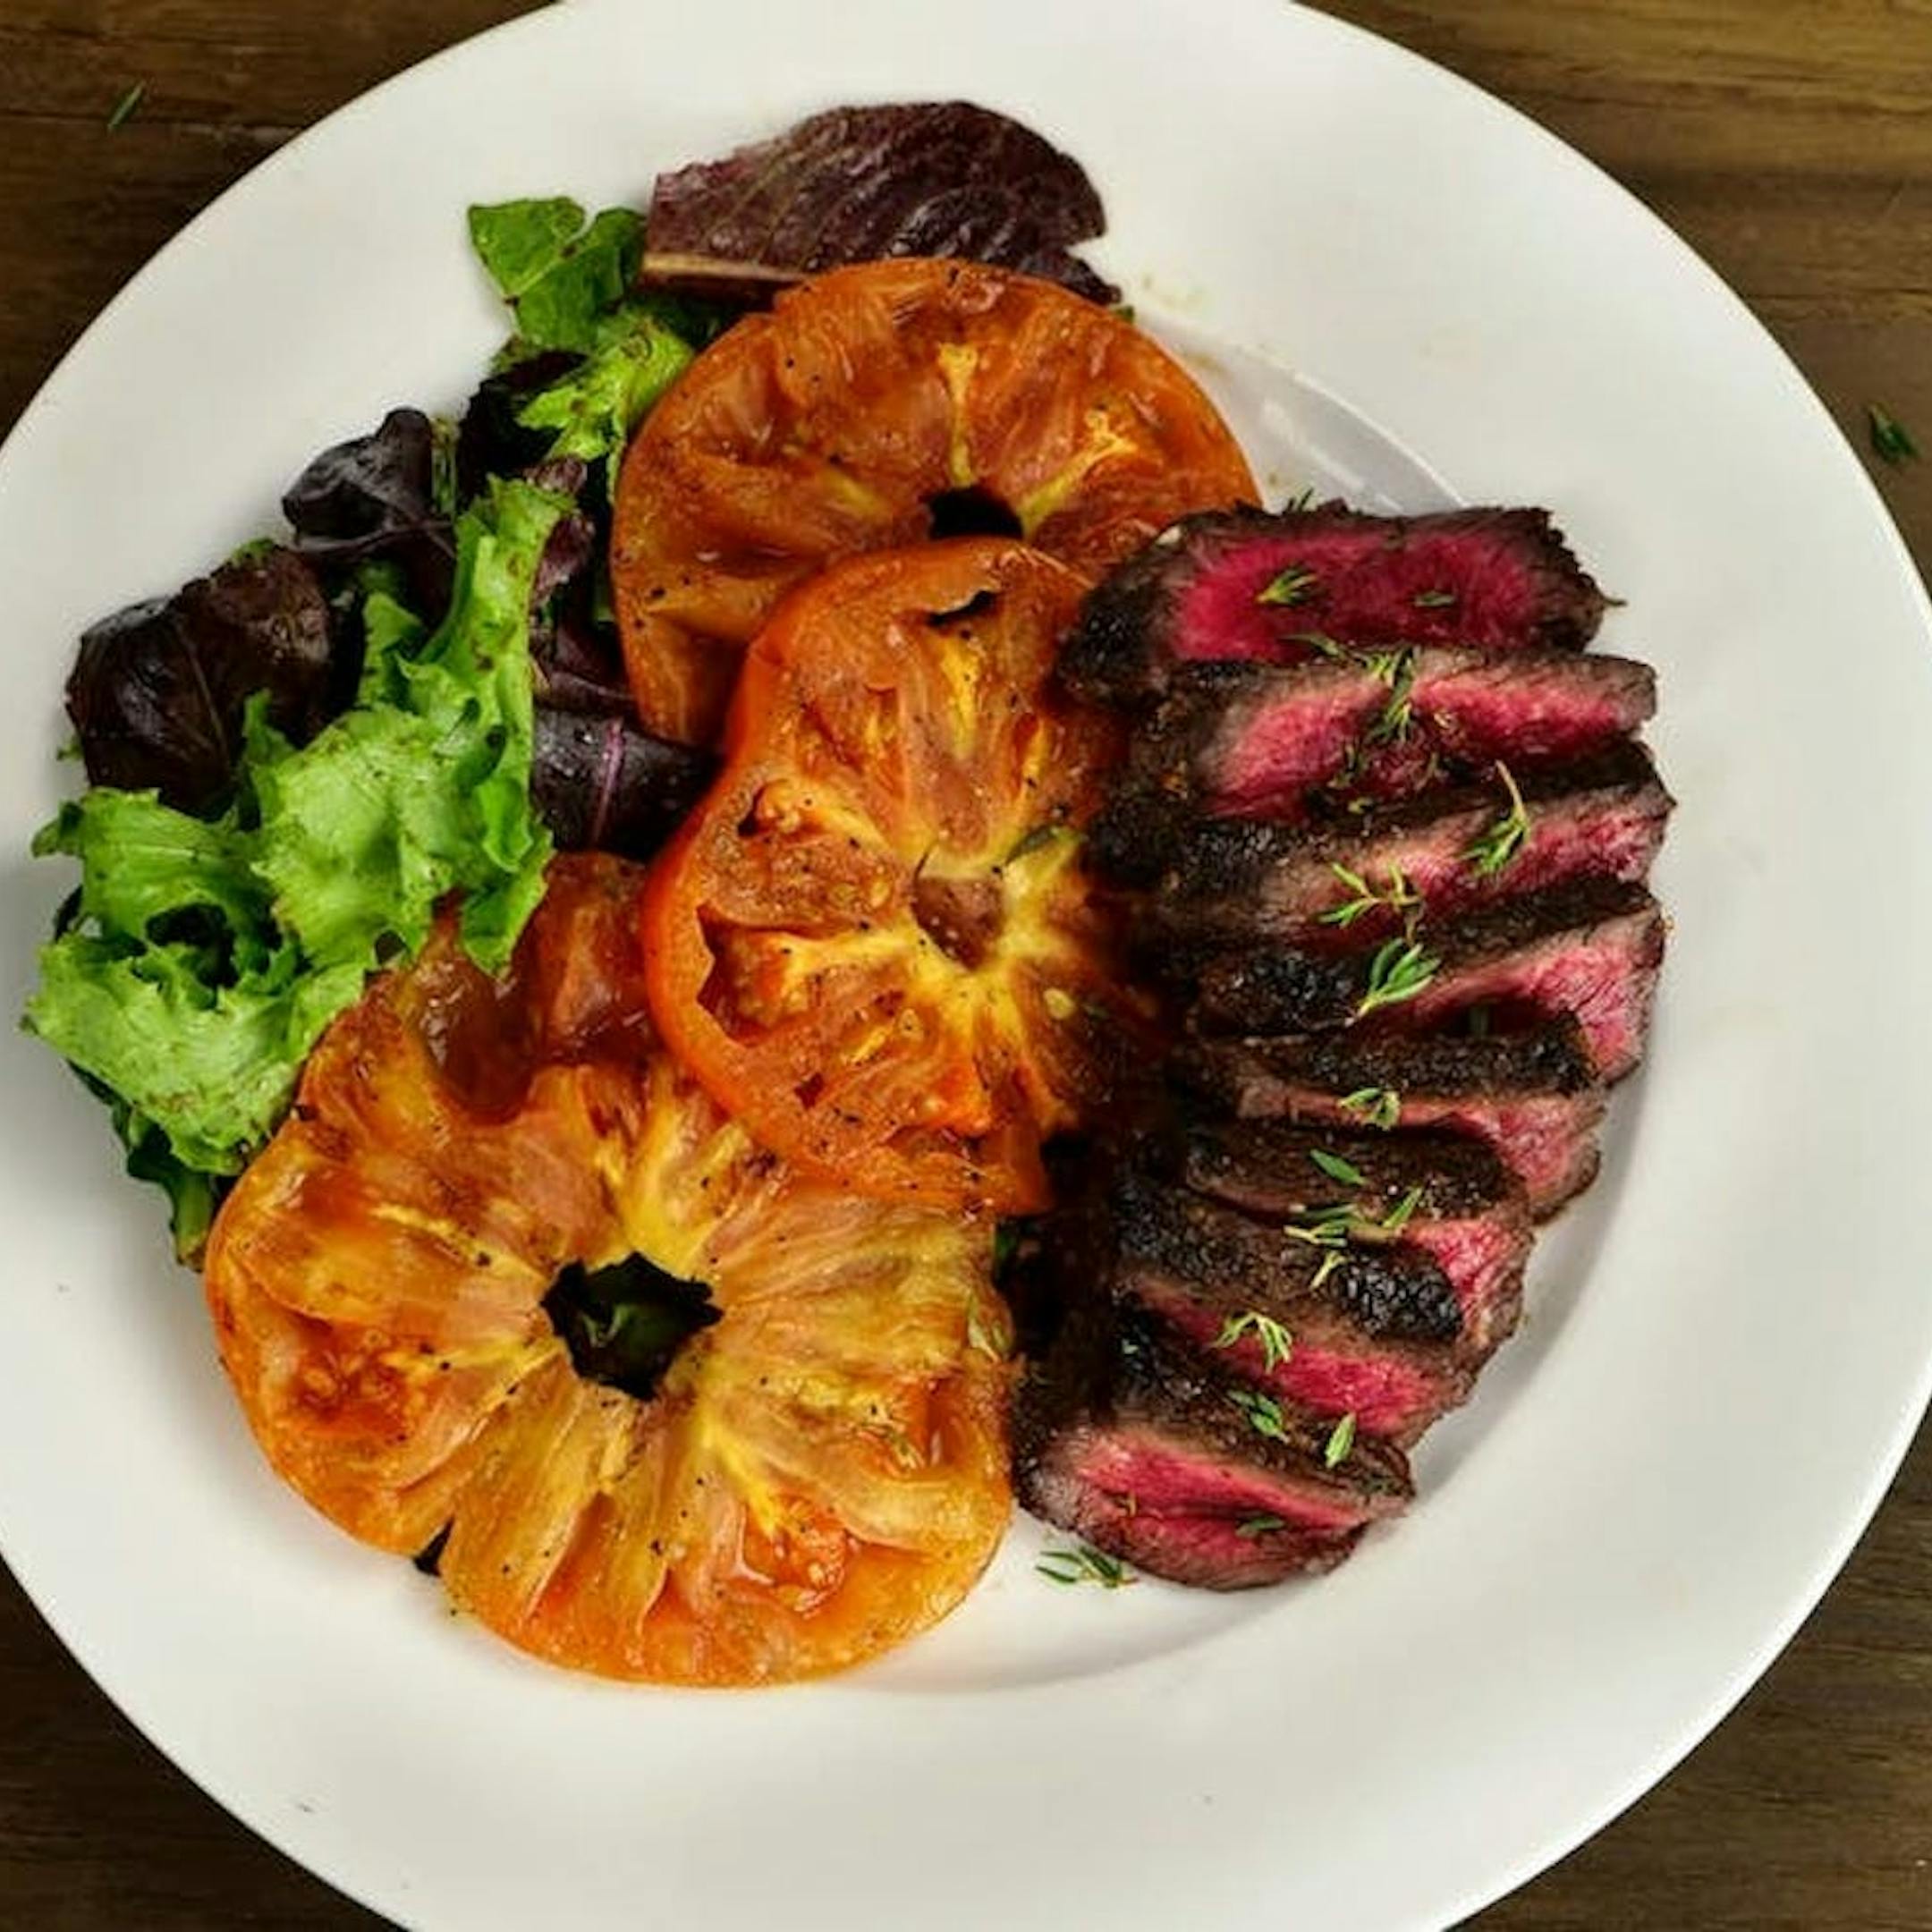 Zesty Denver Steak with Grilled Tomatoes